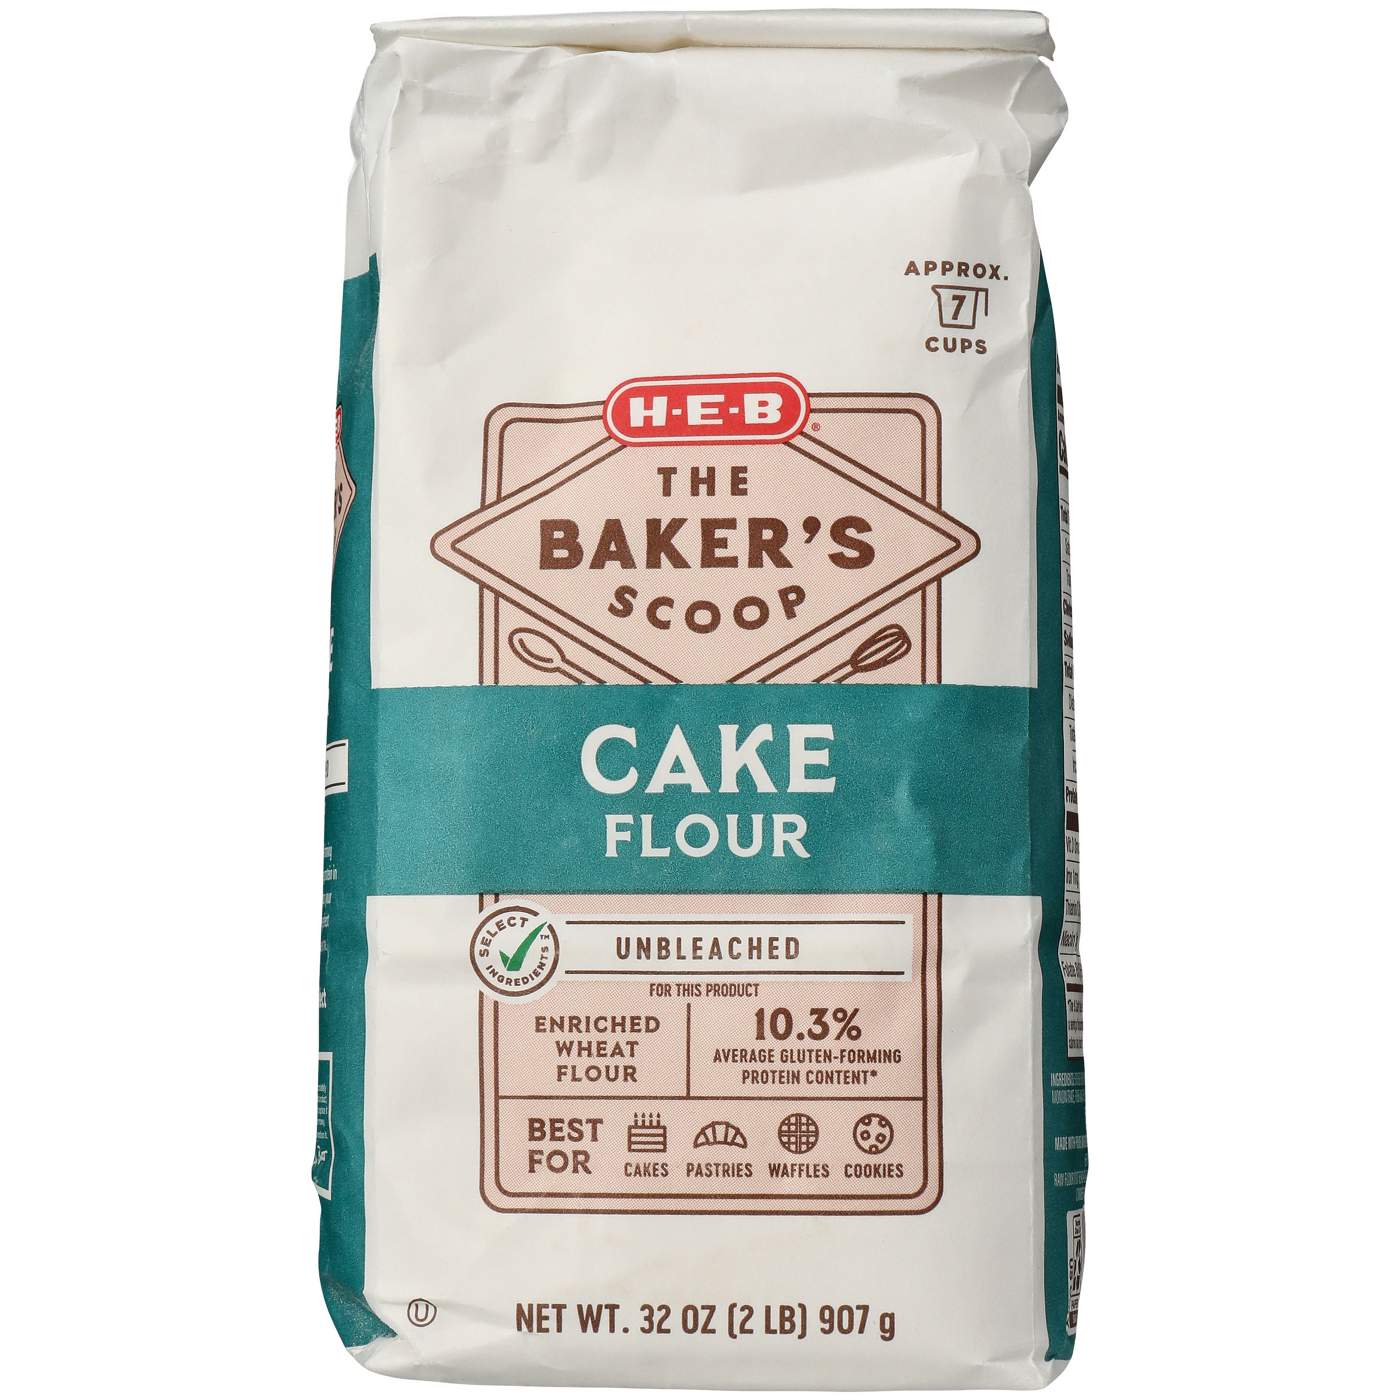 H-E-B The Baker's Scoop Unbleached Cake Flour; image 1 of 2